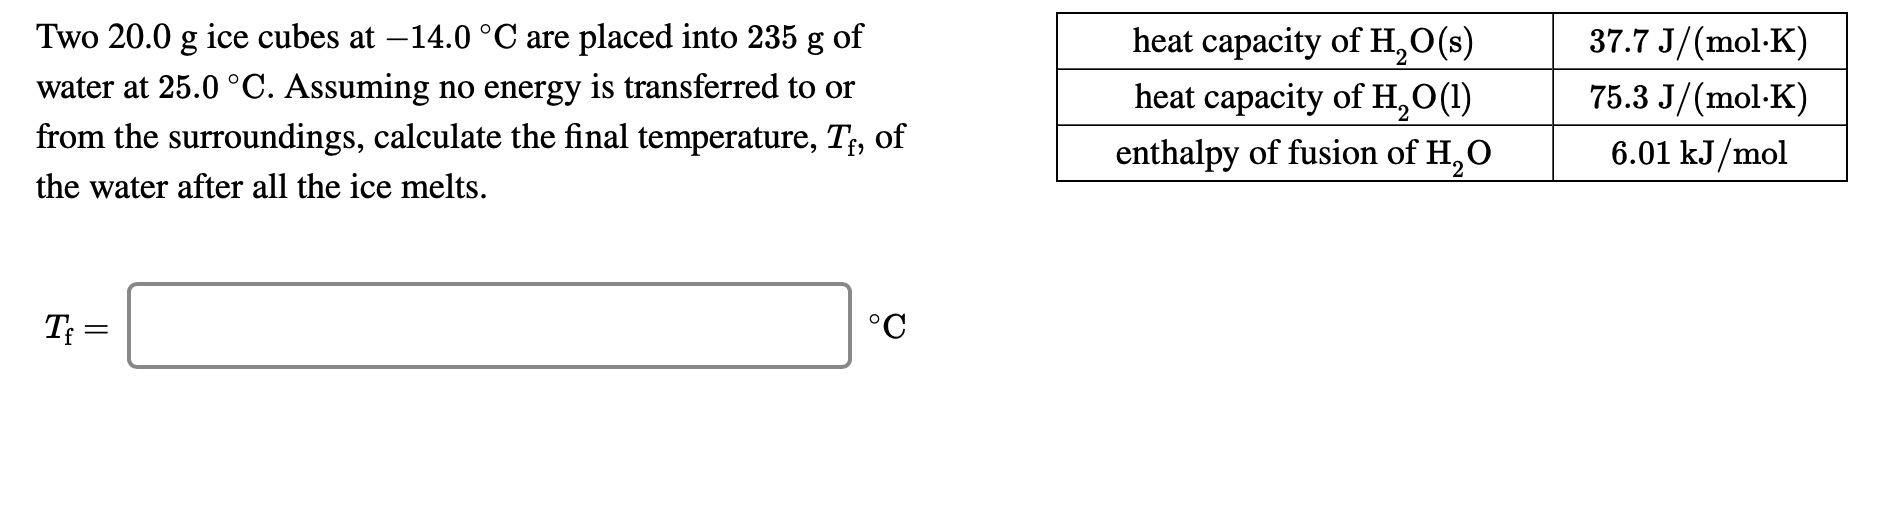 37.7 J/(mol-K)
heat capacity of H,O(s)
heat capacity of H,O(1)
Two 20.0 g ice cubes at –14.0 °C are placed into 235 g of
water at 25.0 °C. Assuming no energy is transferred to or
75.3 J/(mol-K)
from the surroundings, calculate the final temperature, T;, of
6.01 kJ/mol
enthalpy of fusion of H,O
the water after all the ice melts.
T =
°C
I|
